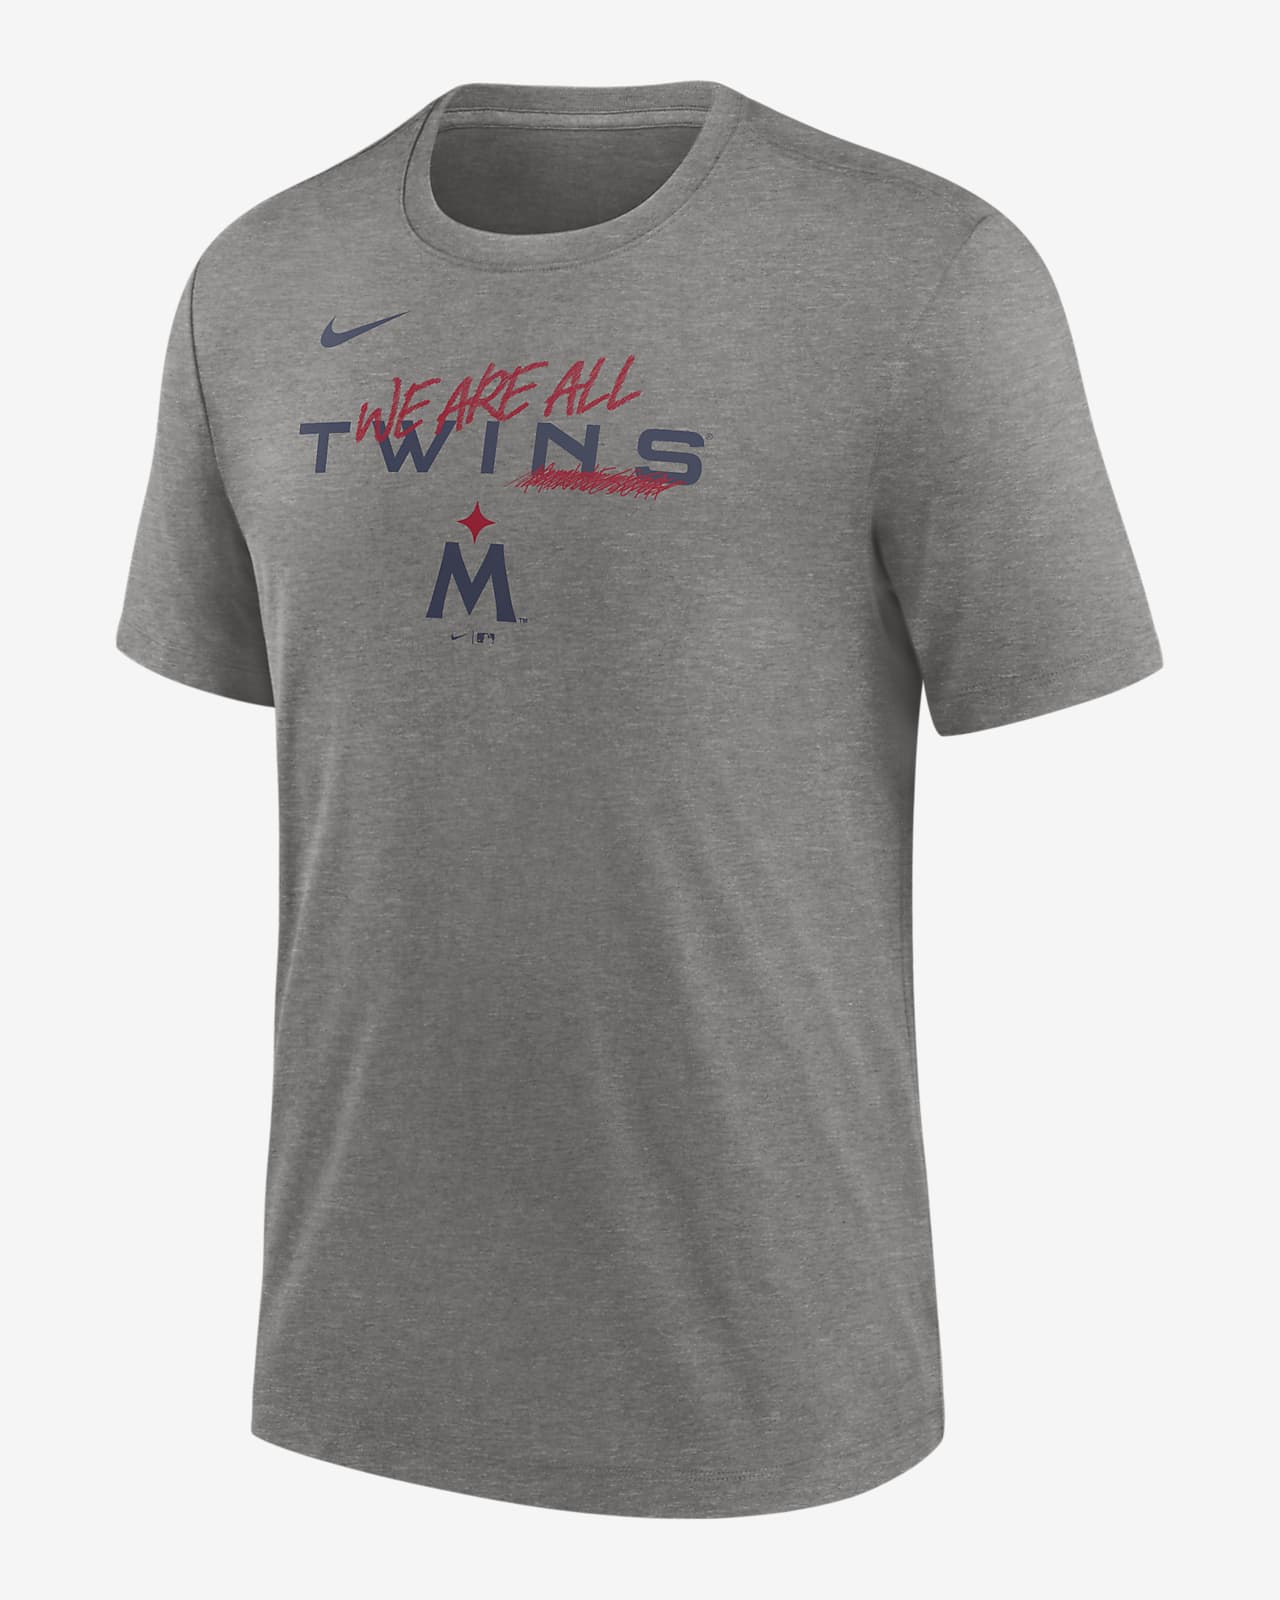 new twins jerseys for sale